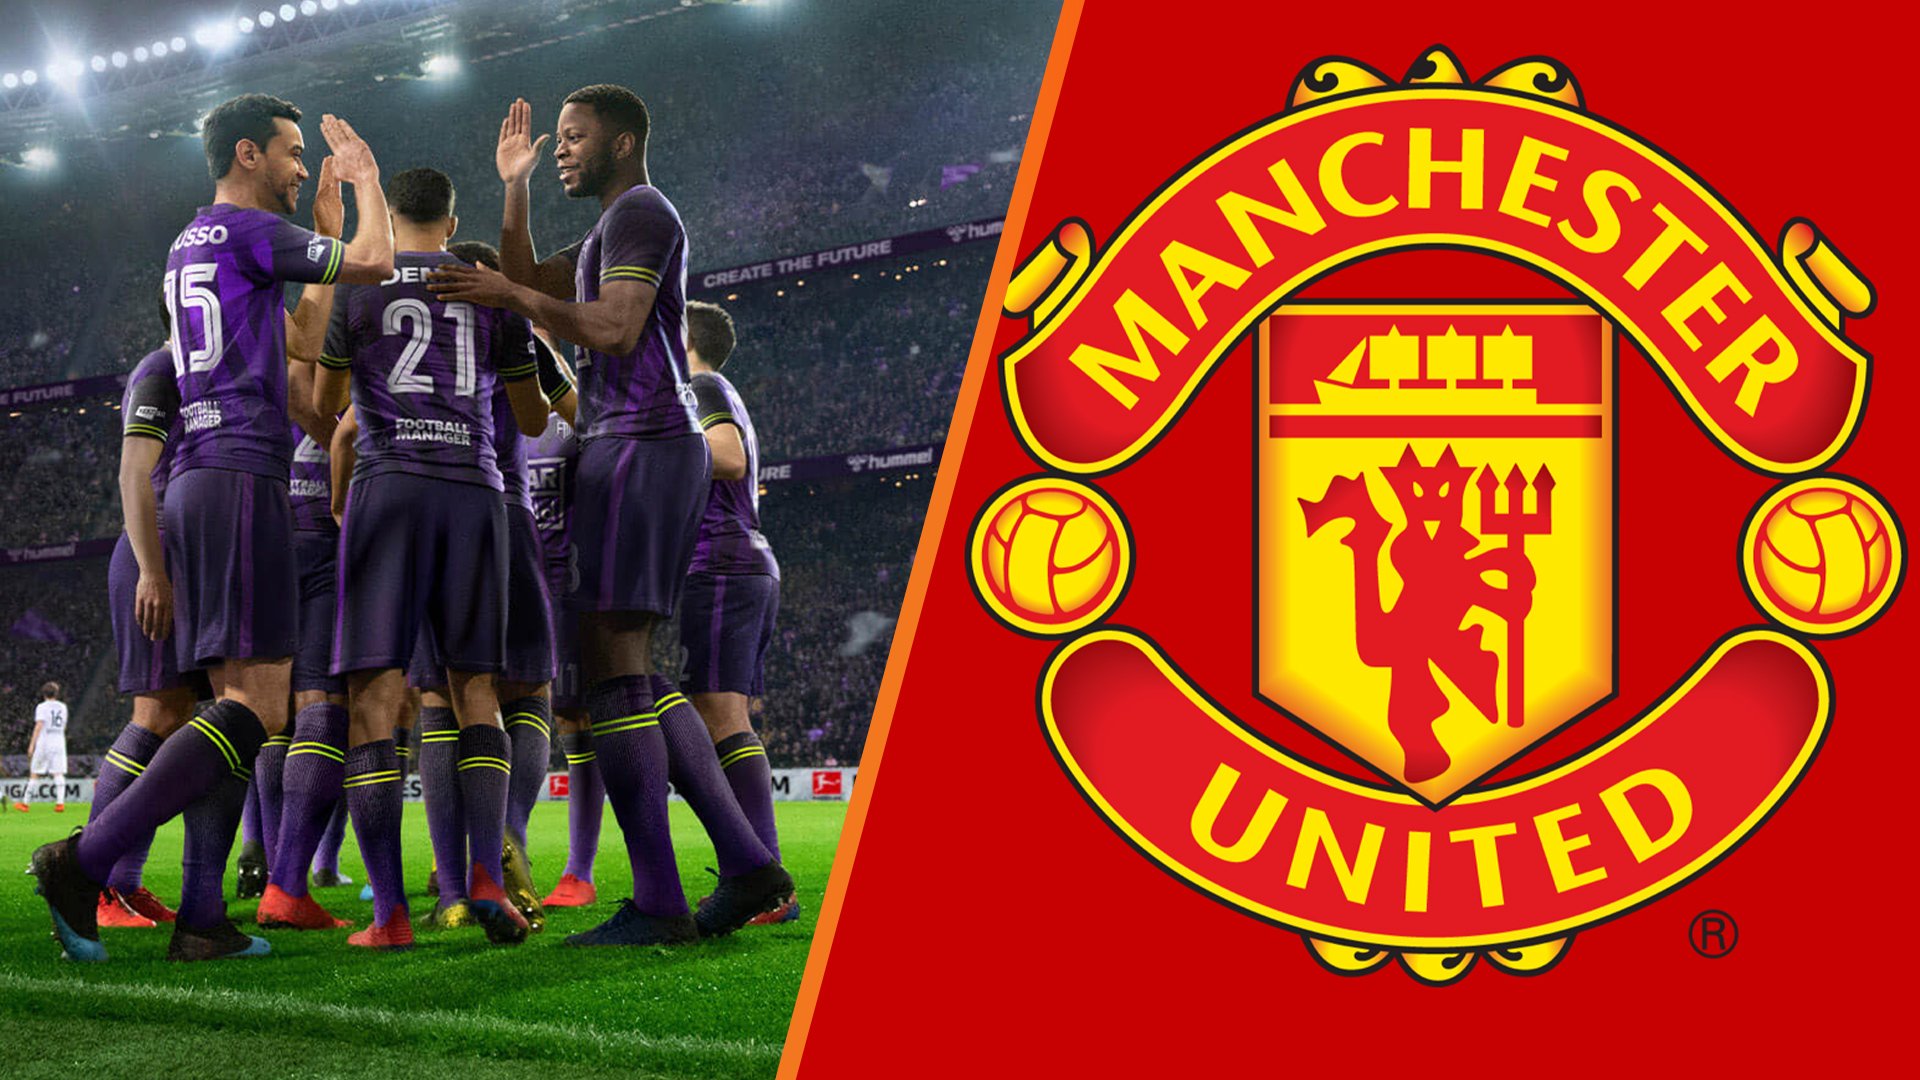 Football Manager will no longer use the Manchester United name